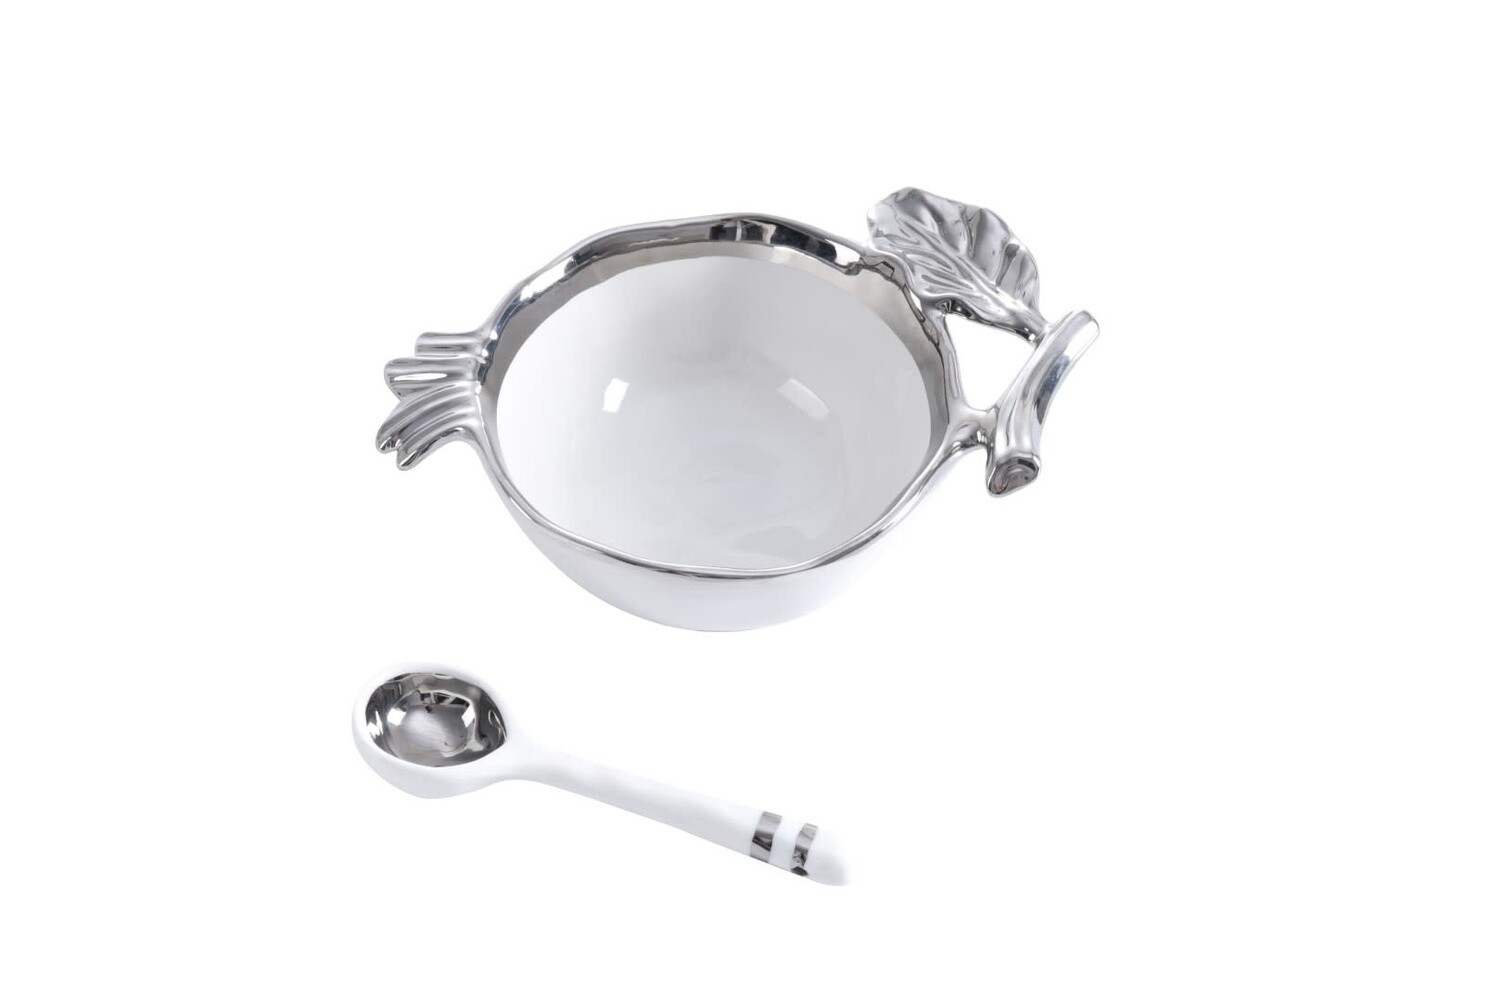 White/ Silver Pomegranate Bowl and Spoon